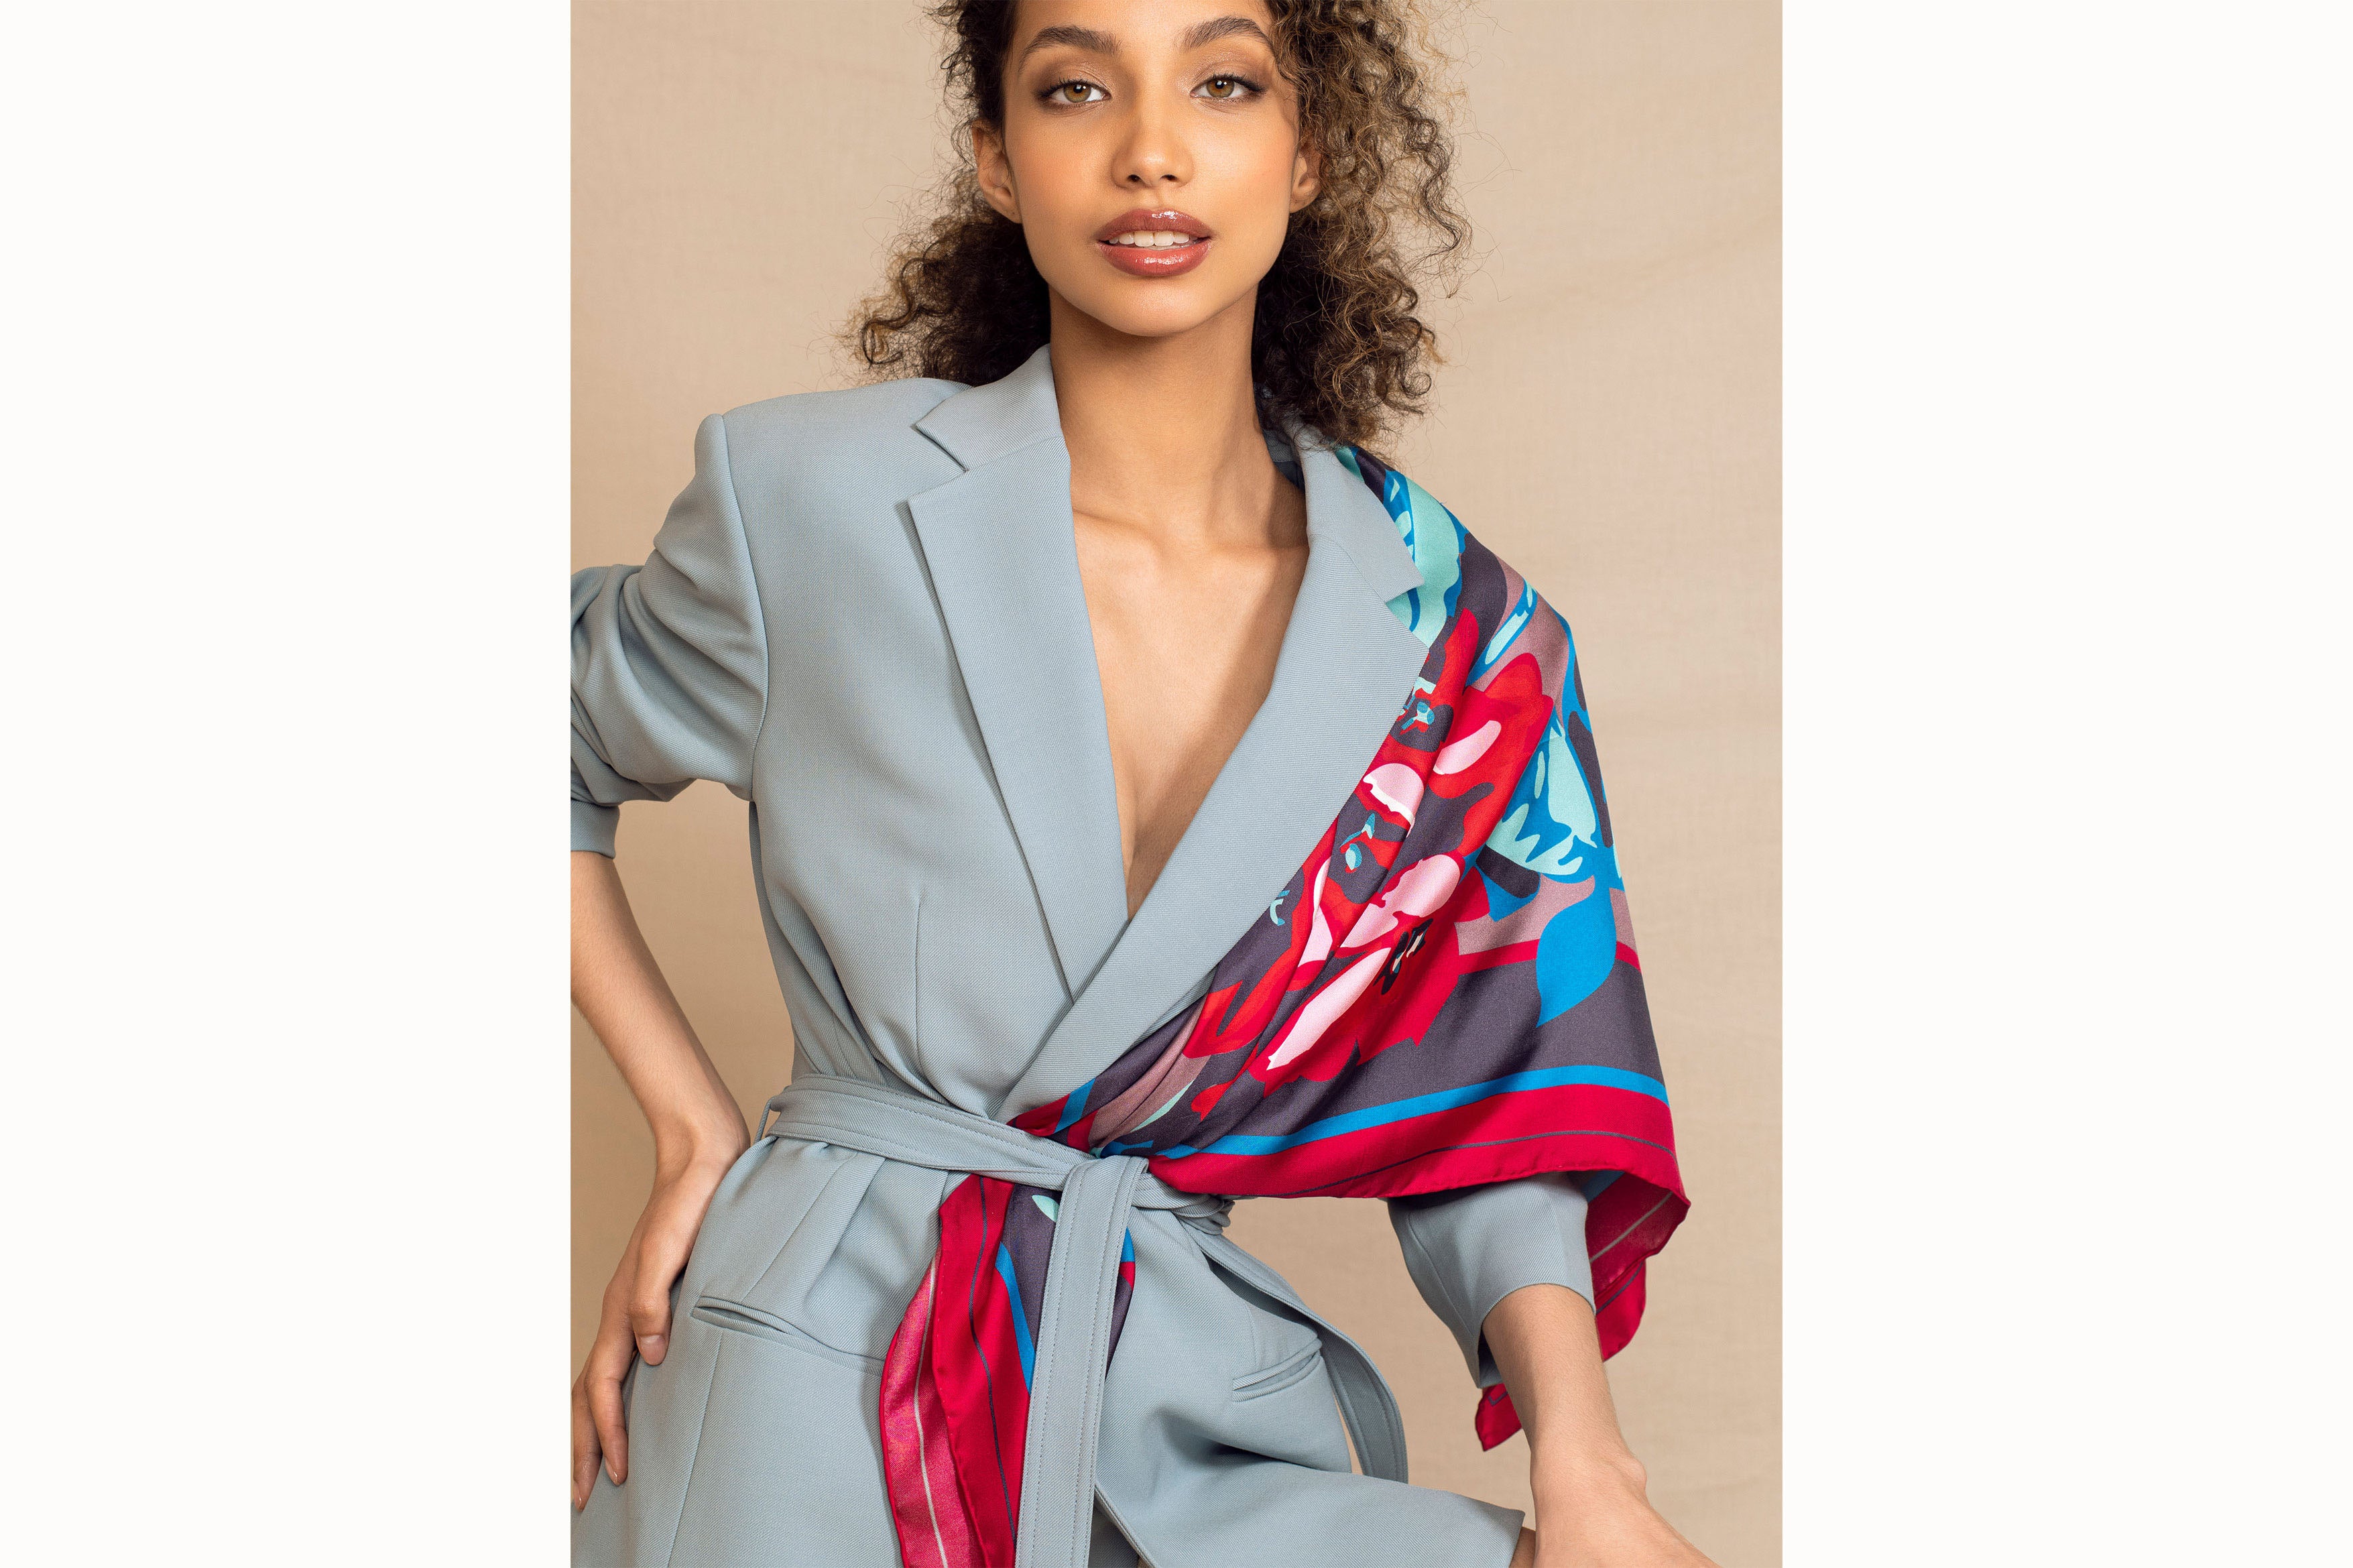 Image of female model with hands on hips while wearing the scarf folded in a triangle and over the right shoulder and tucked into the sash of a blue blazer.